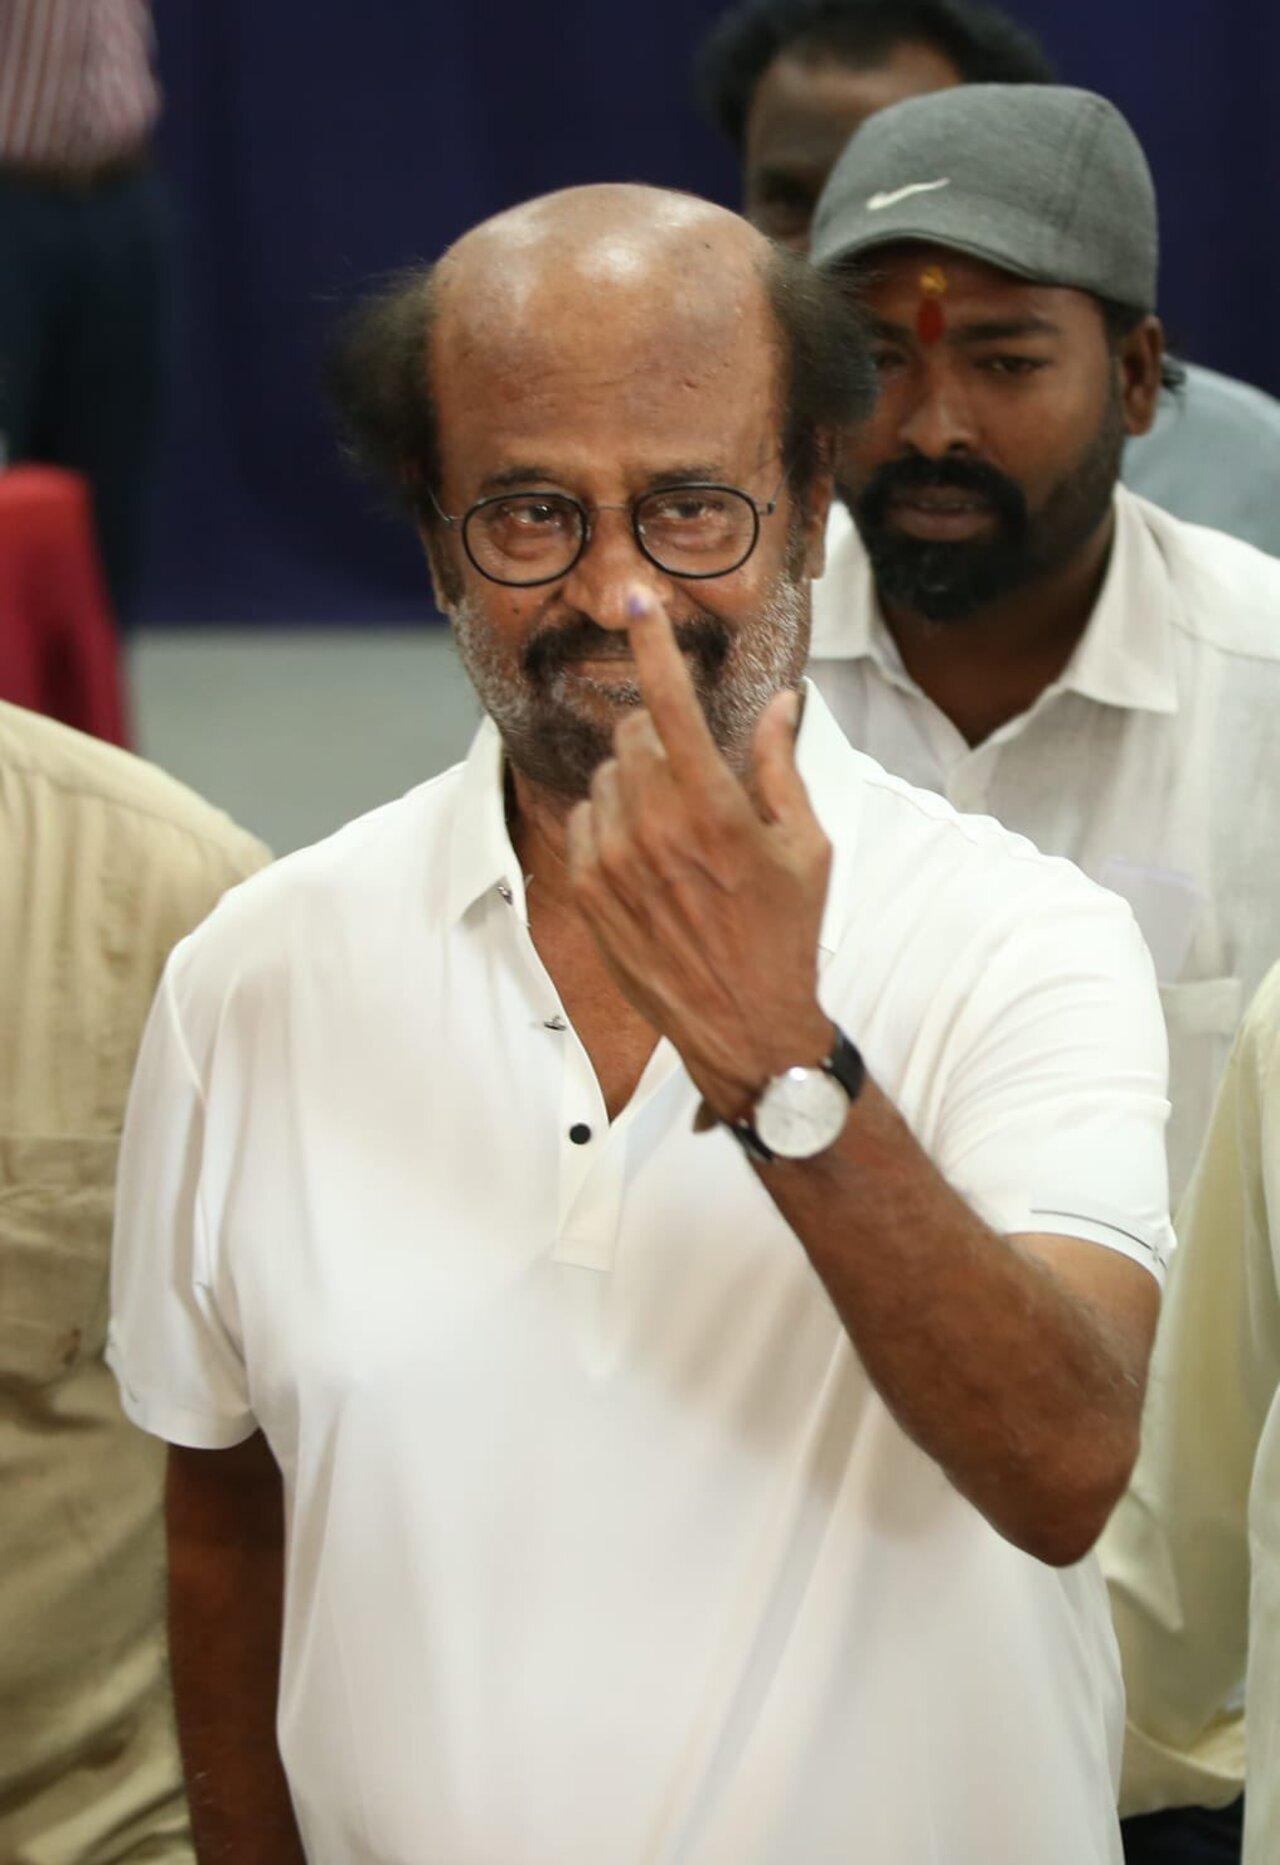 Rajinikanth flaunts his inked finger after he cast his vote in Chennai. He also encouraged the youth and others to cast their votes and fulfil their duty towards the country